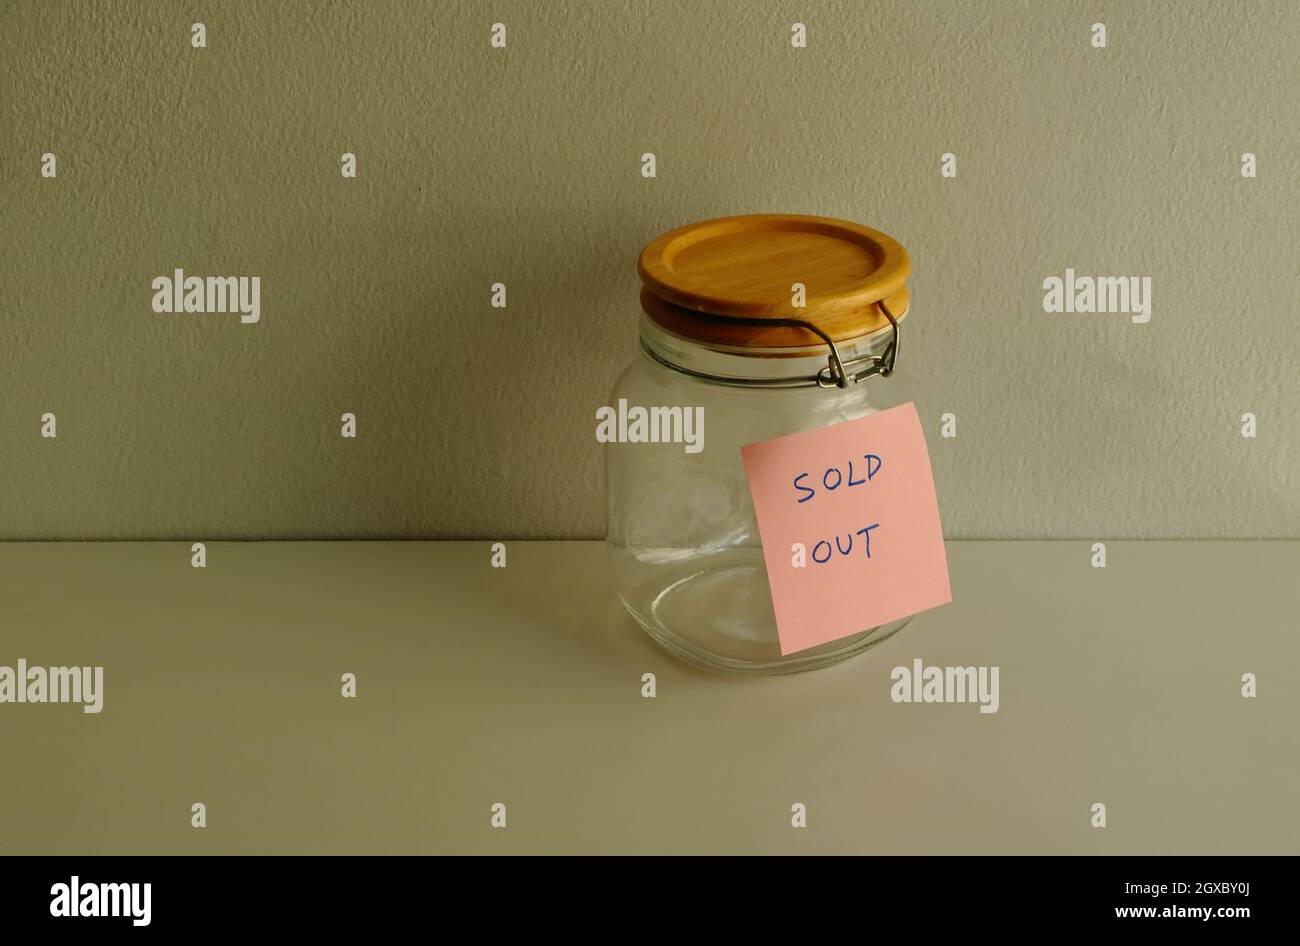 Selective focus on adhesive note with message sold out attached to a jar placed on wooden table against cement wall Stock Photo